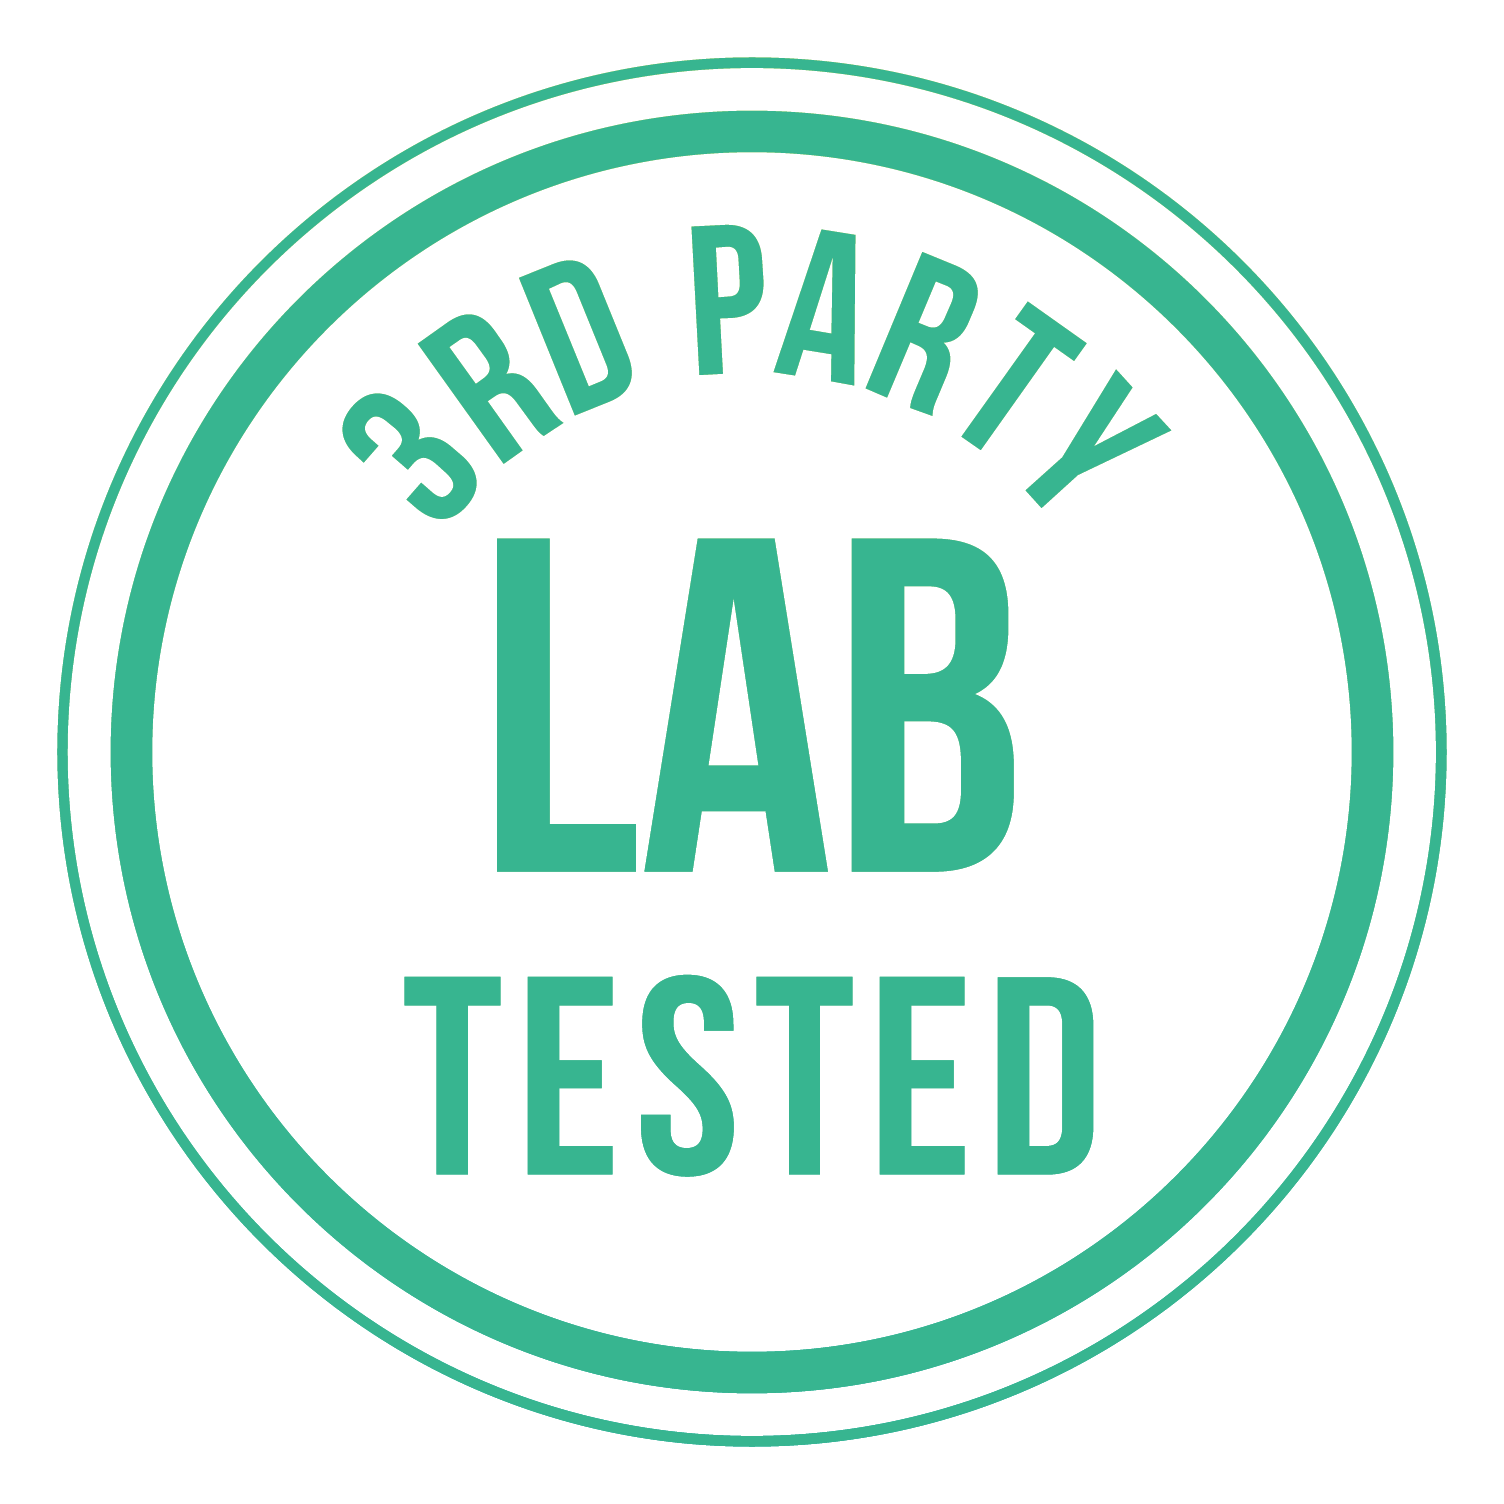 3rd party lab tested